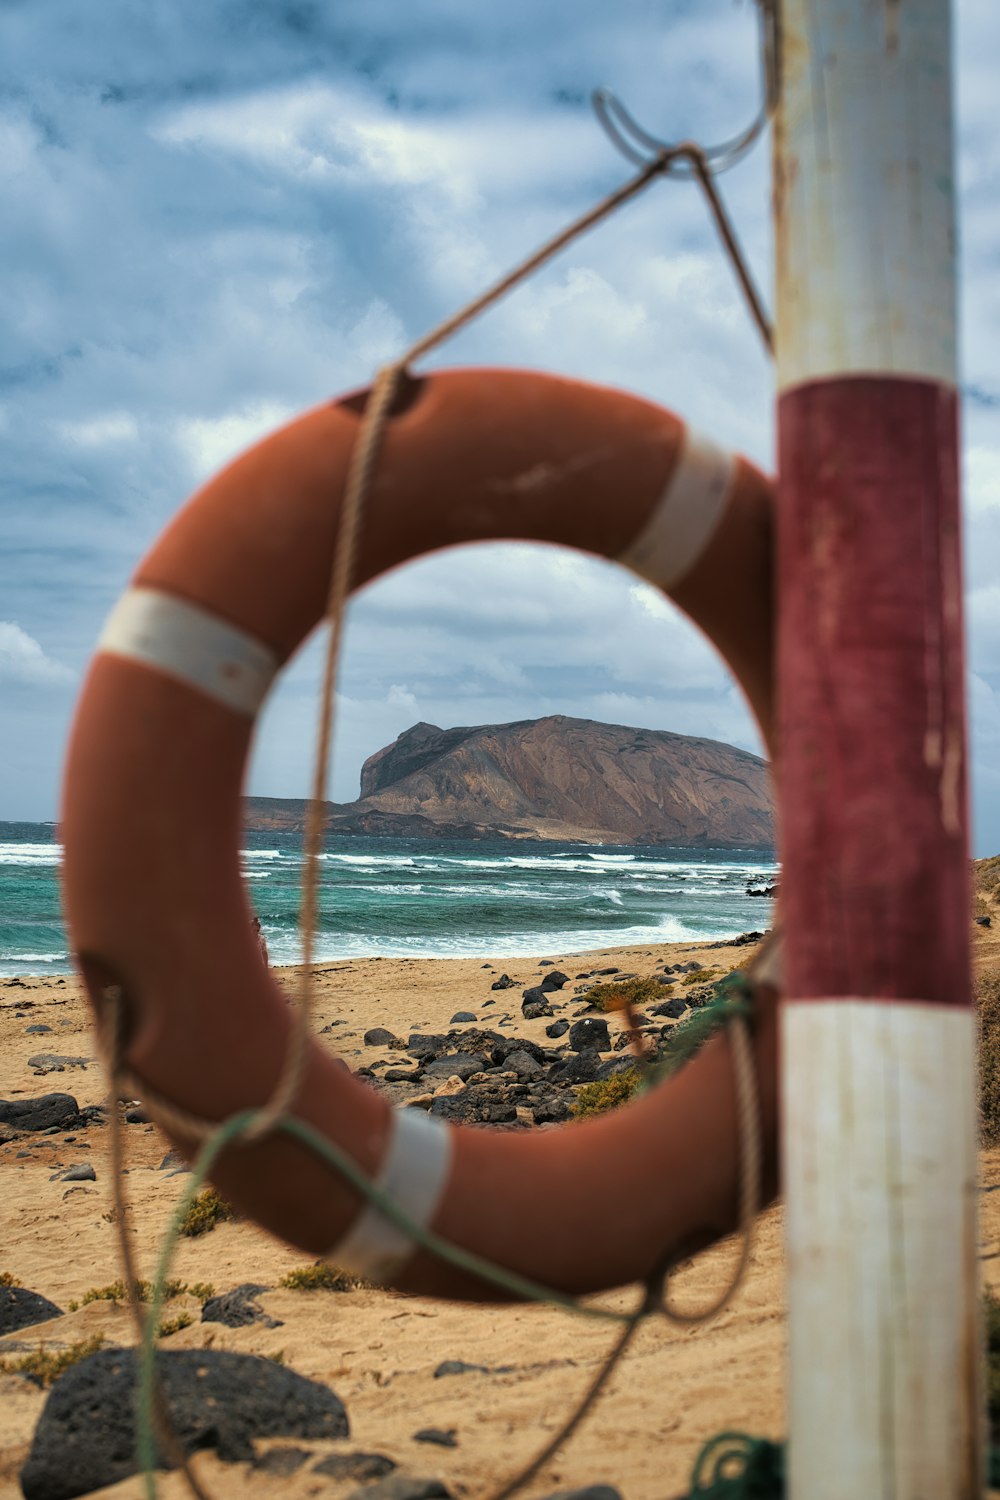 a life preserver hanging on a pole on a beach